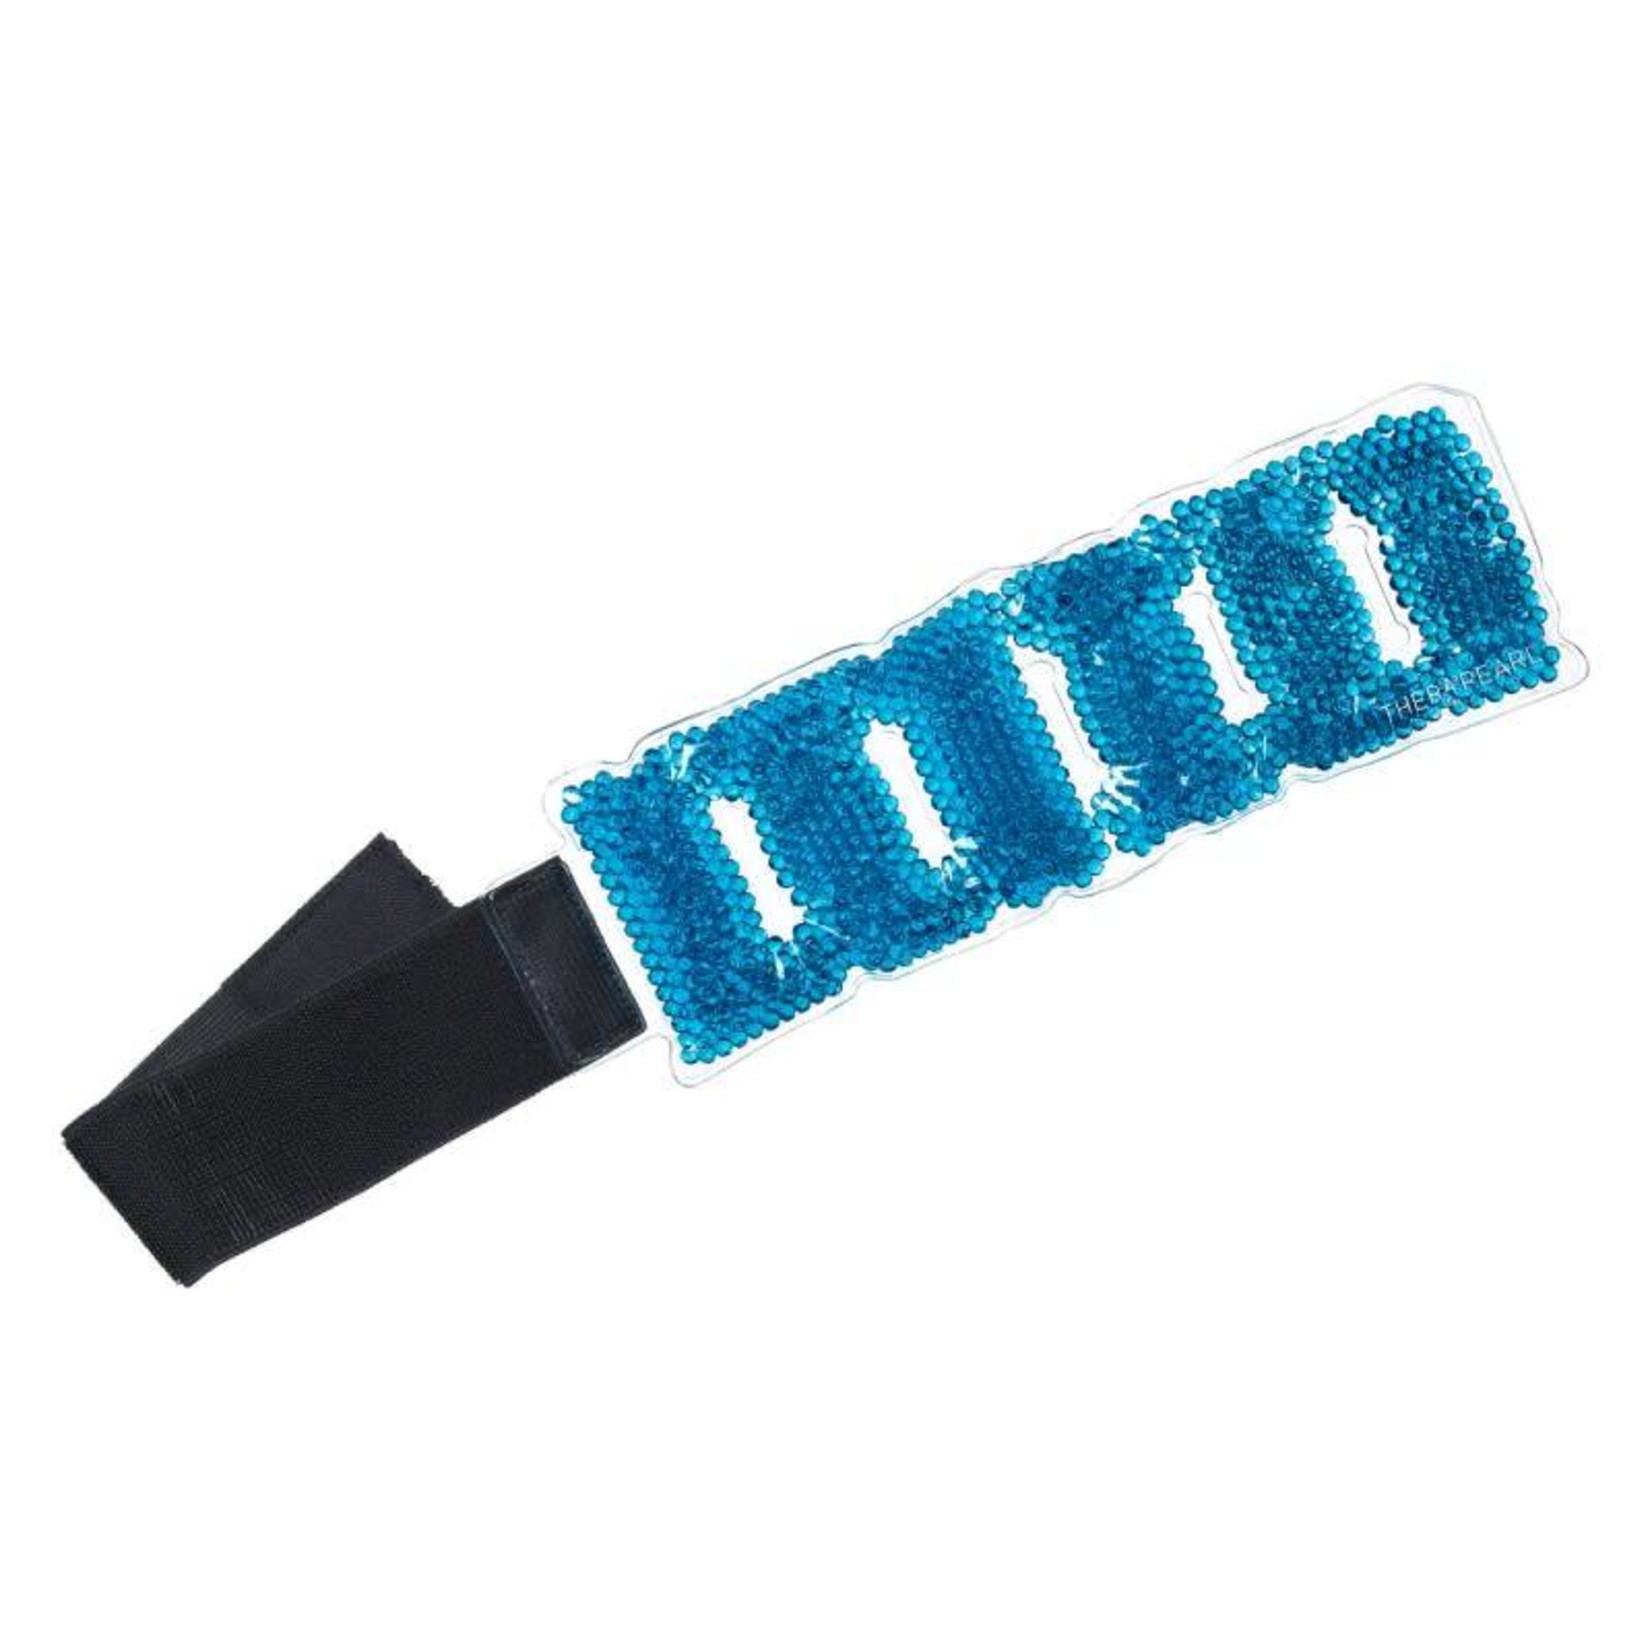 Performance Health Thera-Pearl Ankle/Wrist Wrap